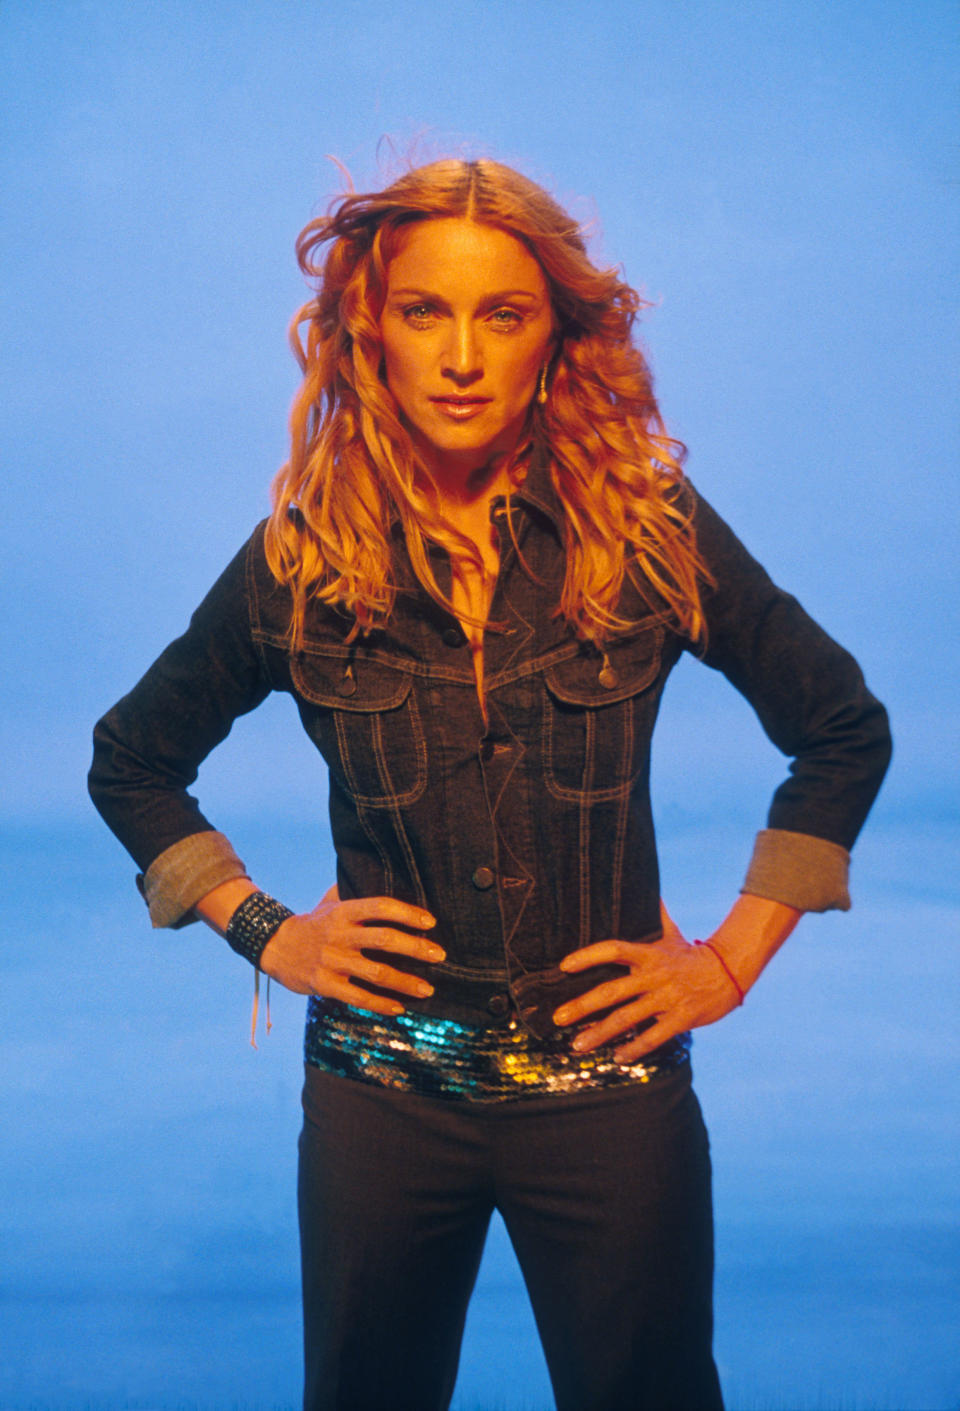 Madonna wore this iconic denim jacket ensemble for her &ldquo;Ray of Light&rdquo; music video in 1998. The outfit was one of the more pared down during this period, which marked yet another reinvention for the singer that was quite different from any of her previous phases. As Dazed described it, the album, also called &ldquo;Ray of Light,&rdquo; feels &ldquo;<a href="http://www.dazeddigital.com/music/article/39140/1/madonna-ray-of-light-20-anniversary" target="_blank" rel="noopener noreferrer">spiritual, elemental, and enlightened</a>.&rdquo; Around this time, she embraced Kabbala. (On her wrist, you can spot the red string bracelet associated with the religion.)